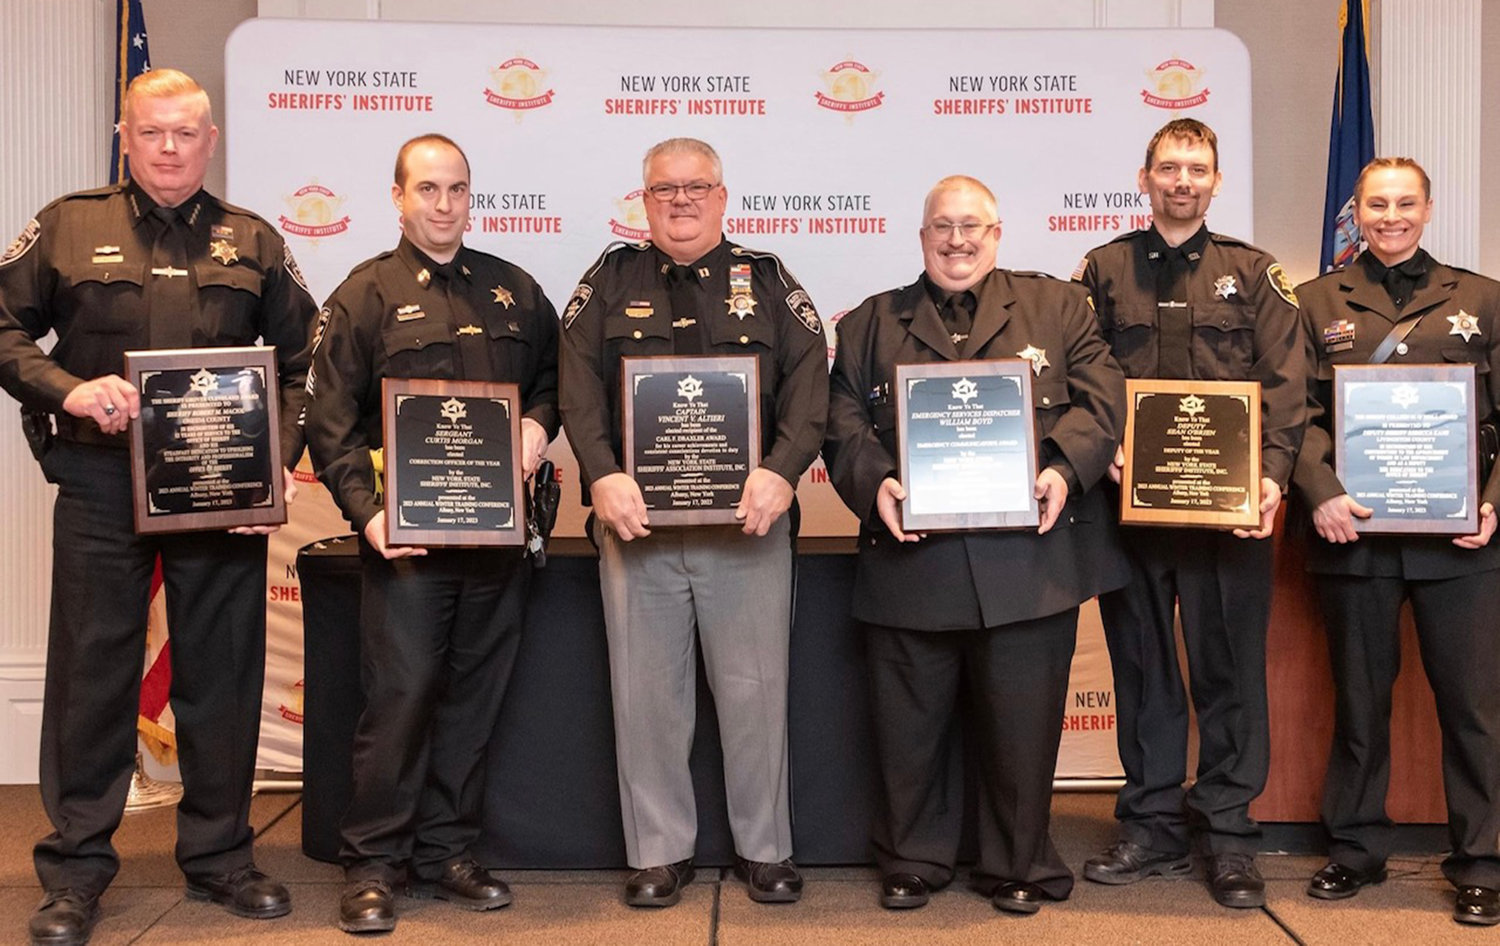 Oneida County Sheriff Robert M. Maciol and Corrections Sergeant Curtis Morgan, left, were both honored with awards this week at the 89th annual winter training conference of the New York State Sheriffs’ Association. Other sheriff’s office members from across the state were also honored.